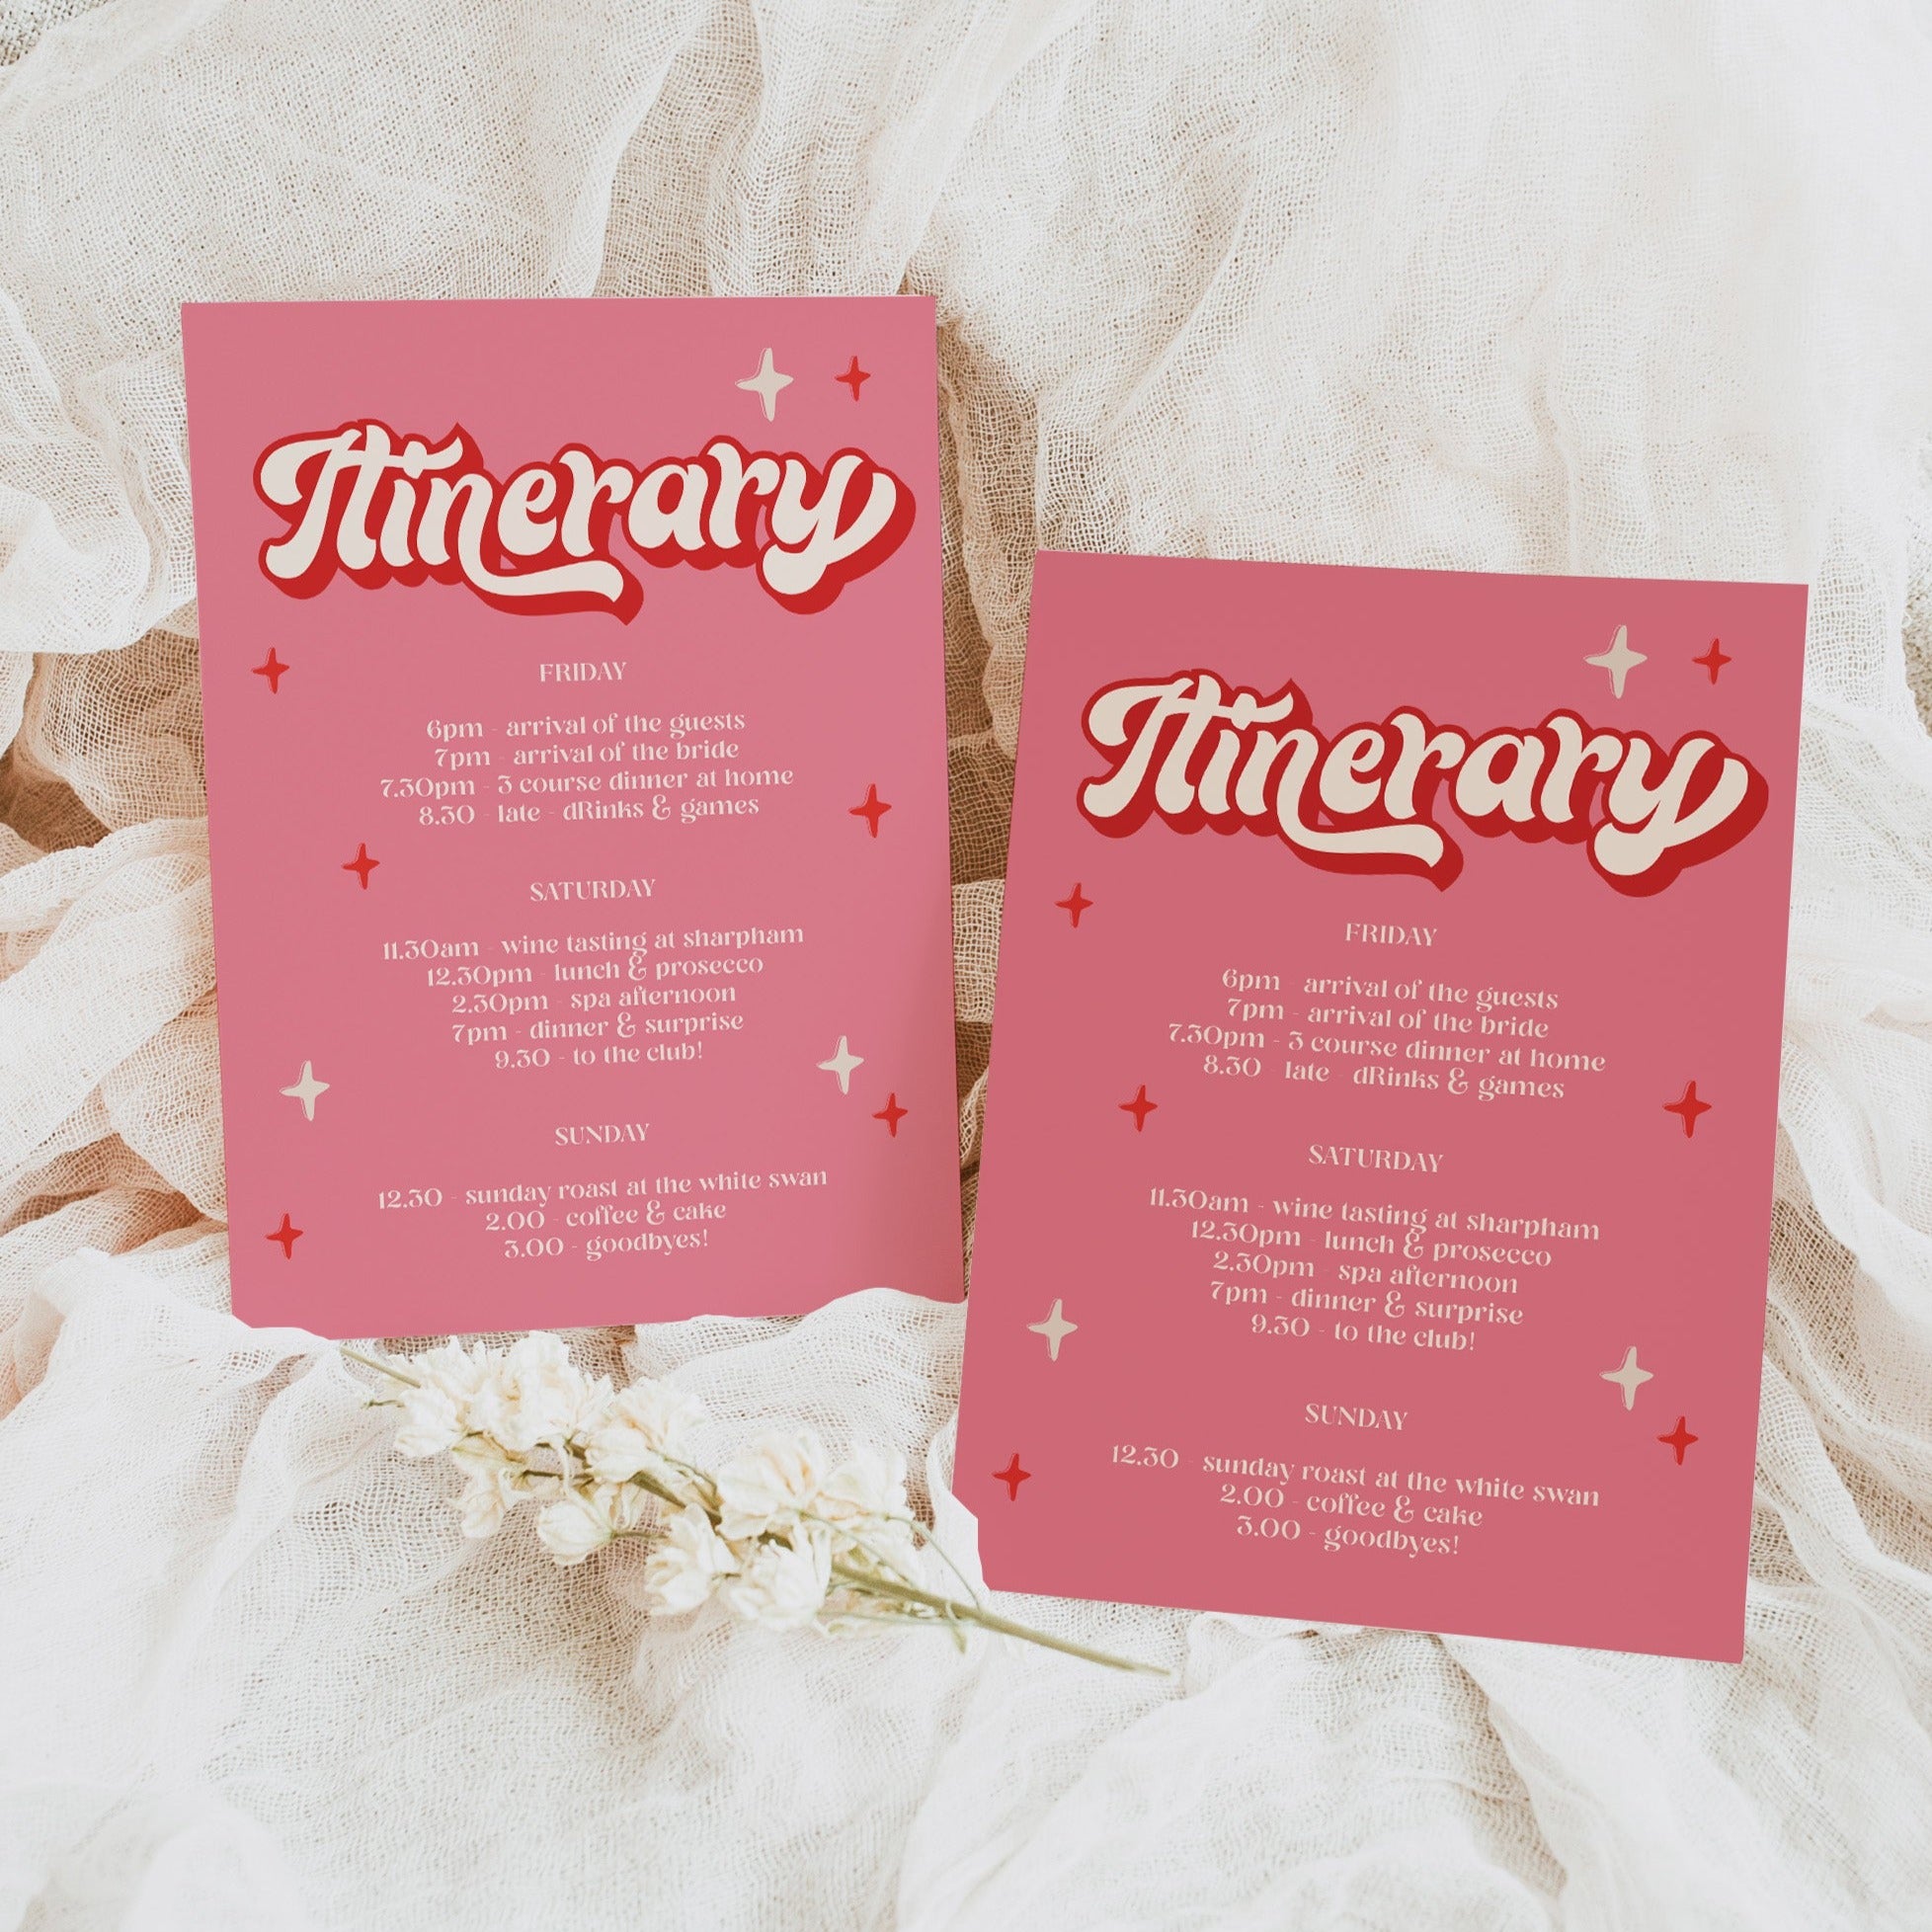 editable 70s style bridal shower itinerary. Fully editable and printable at home or print with a print company